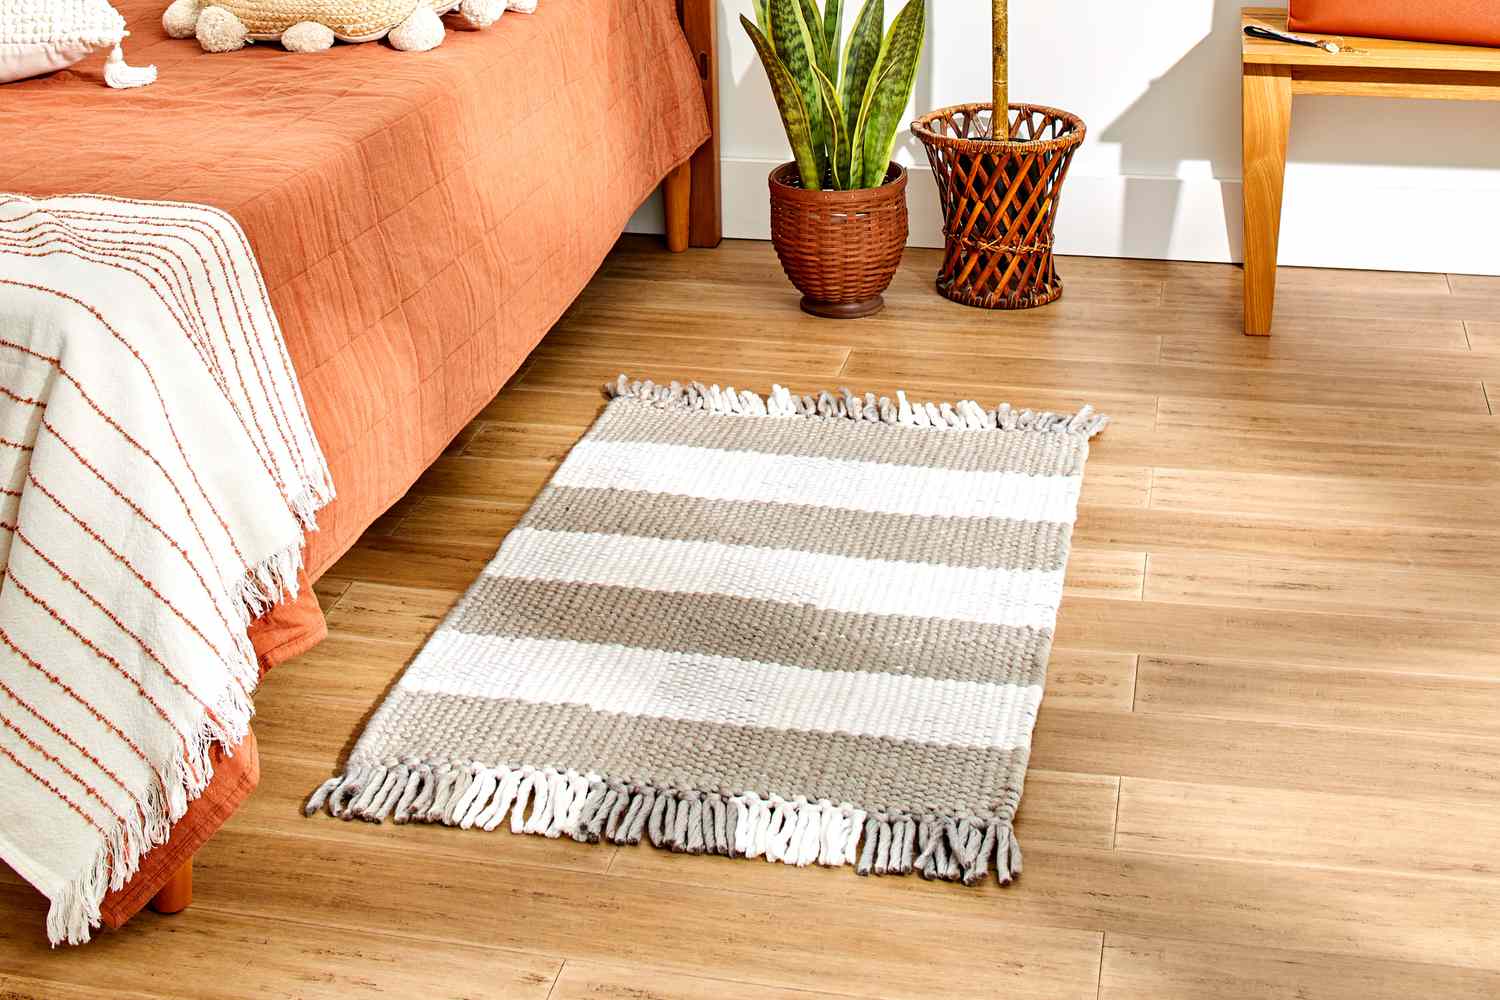 The Rugs.com Washable Eco Plaid Indoor/Outdoor Rug in a bedroom setting